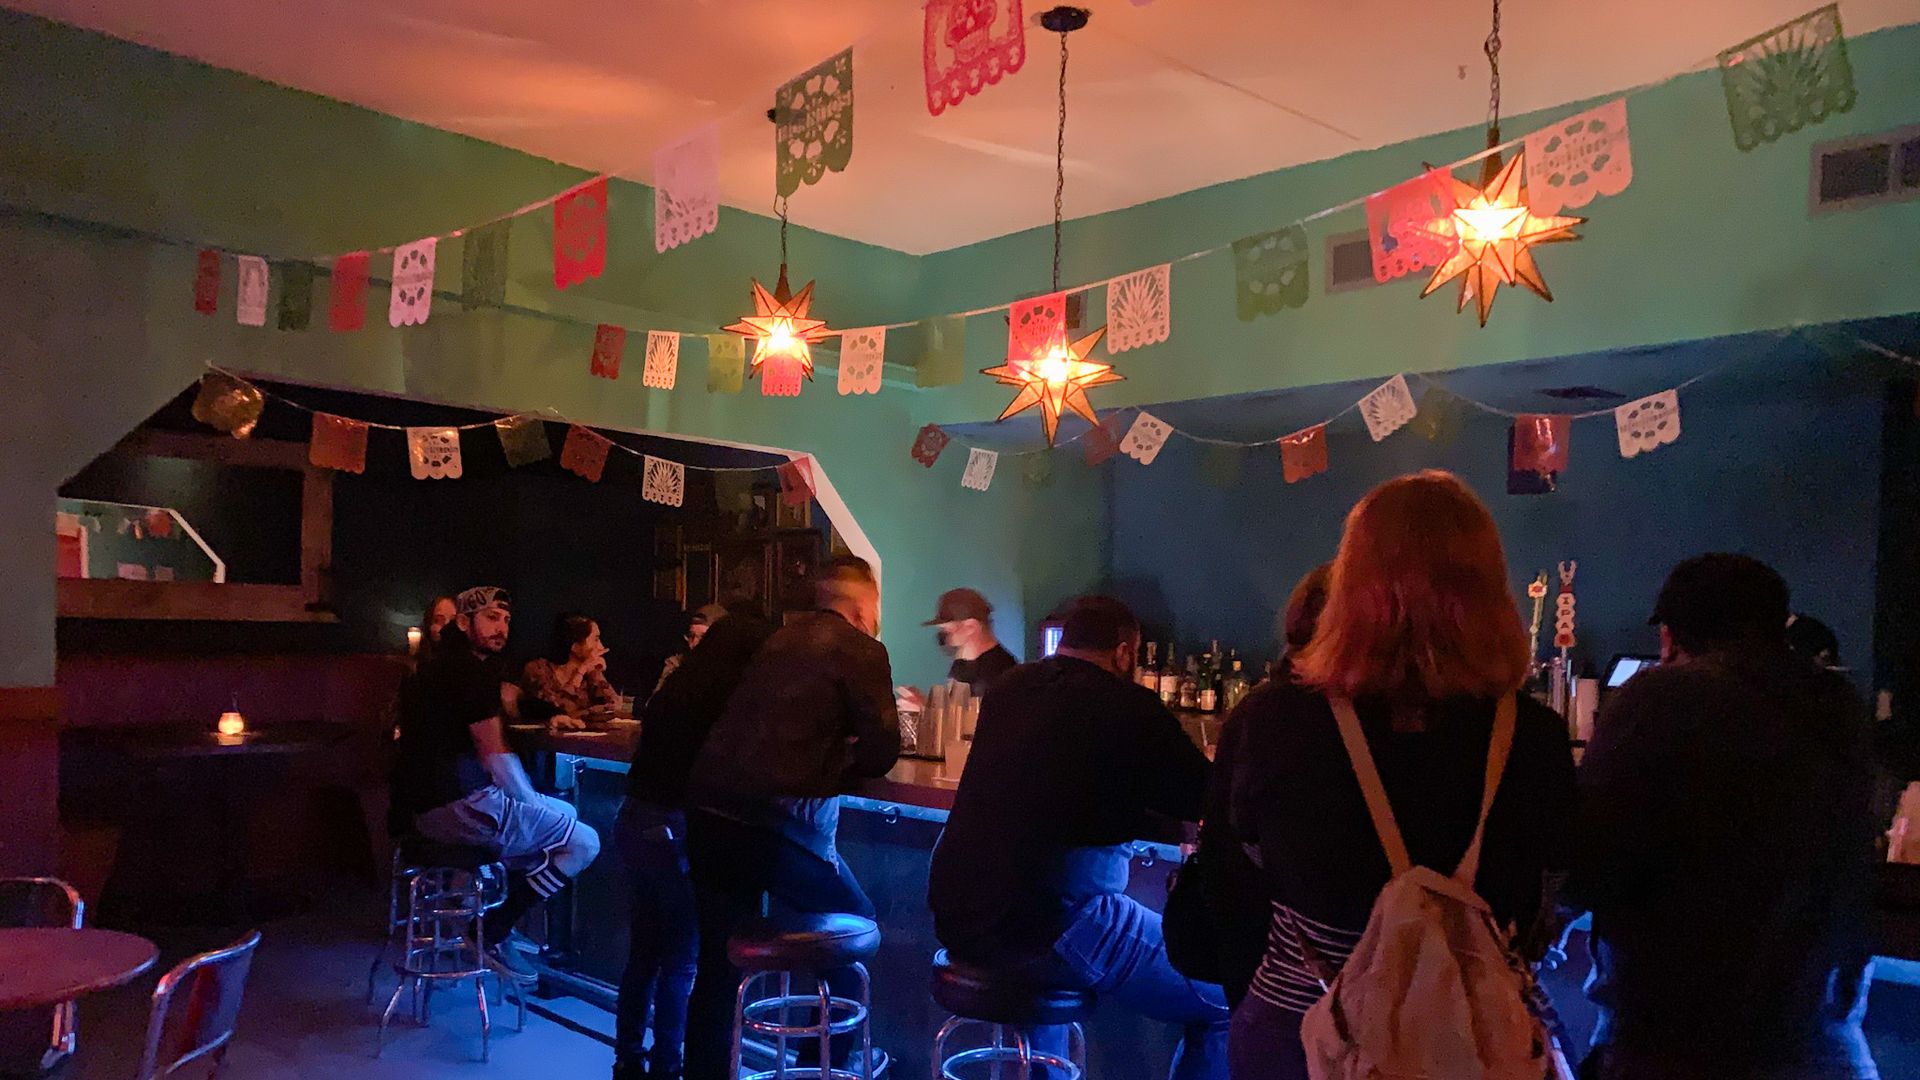 A bar with teal walls and papel picado hanging from the ceiling.